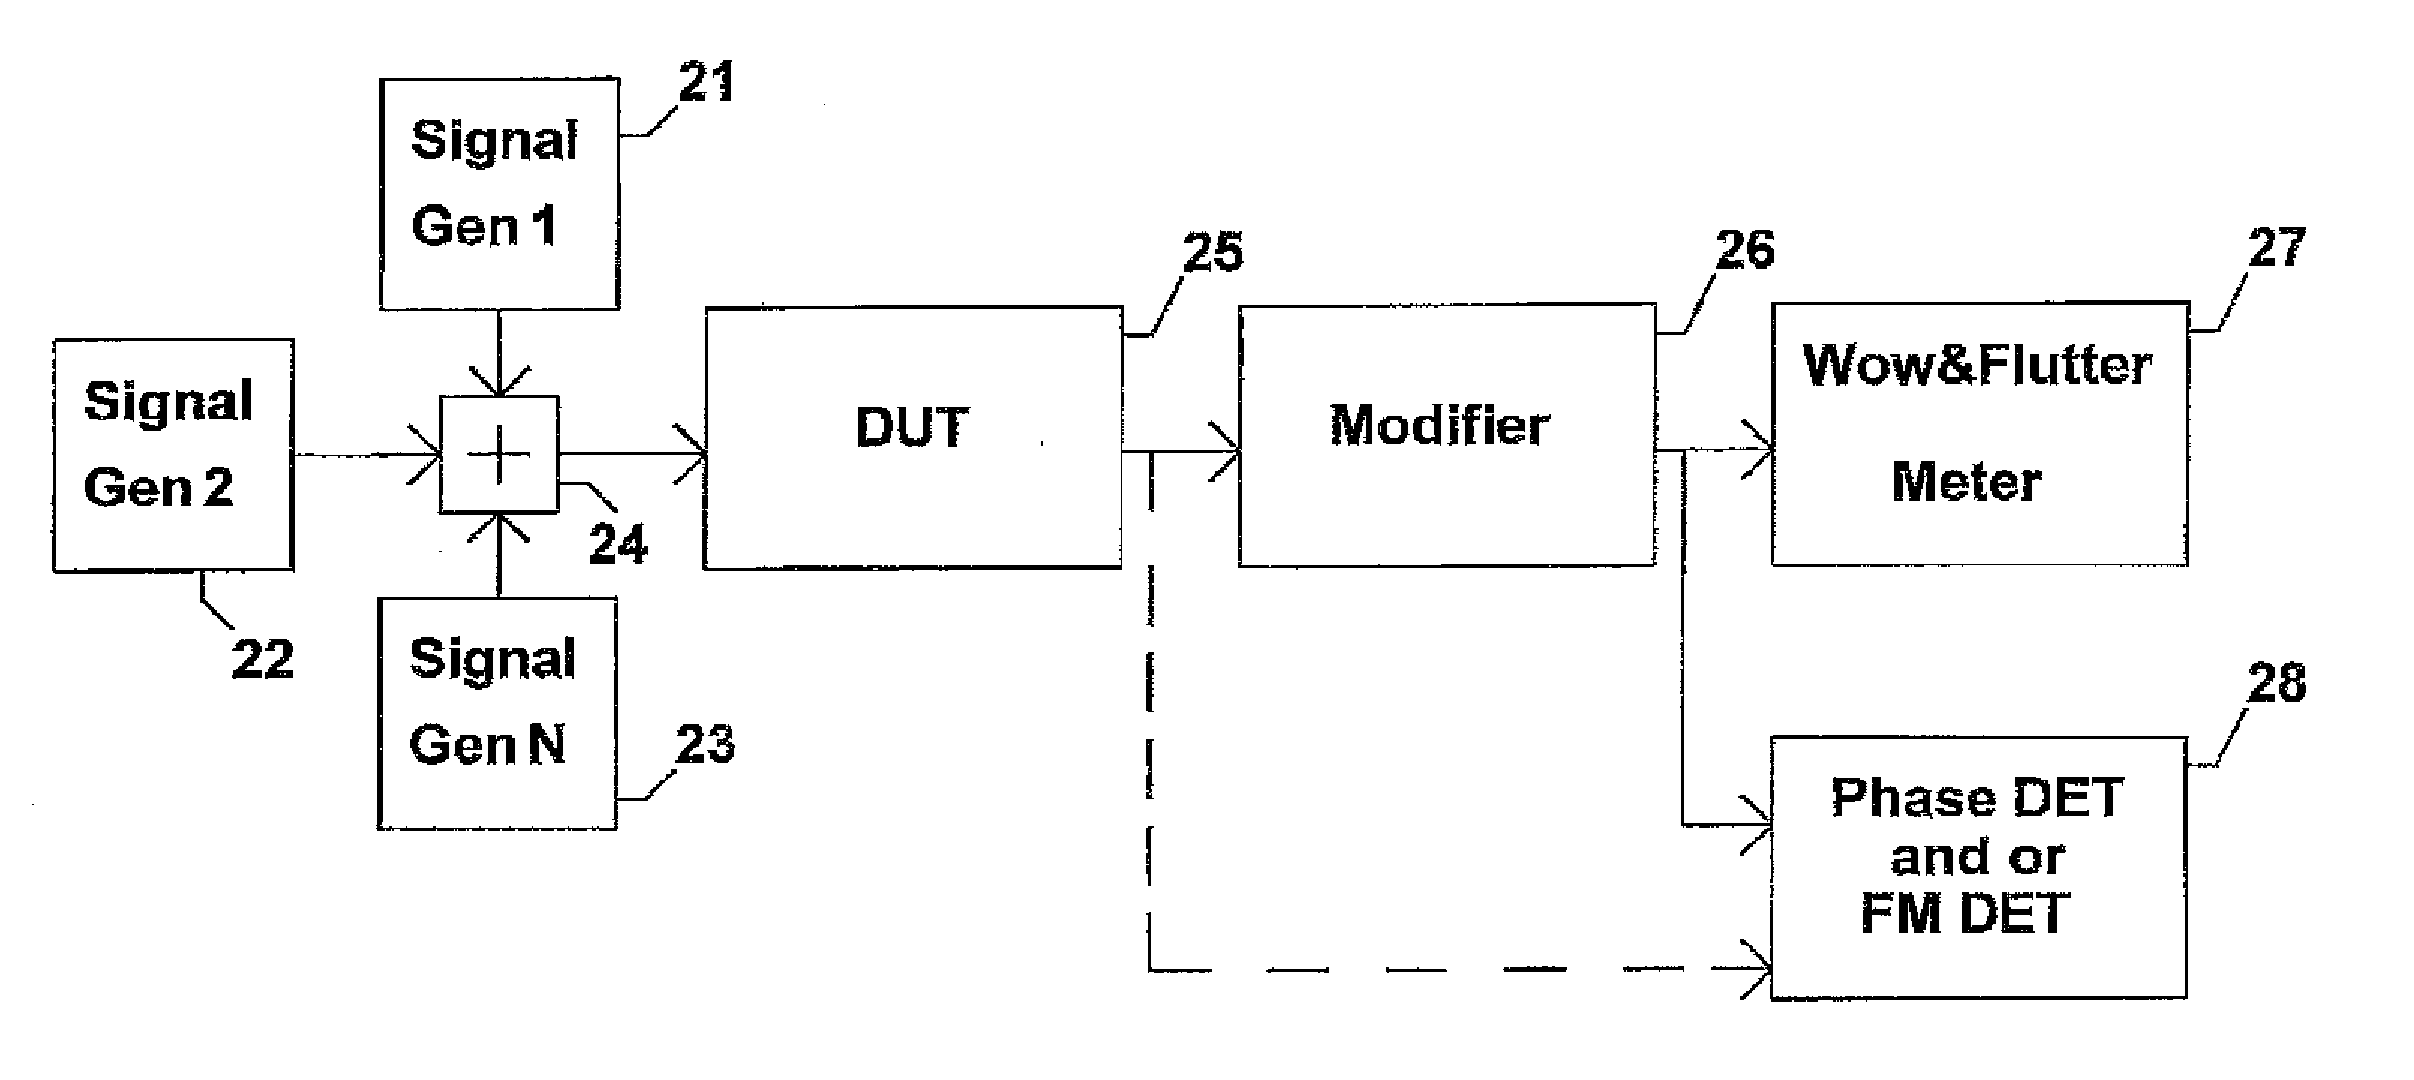 Method and apparatus to measure differntial phase and frequency modulation distortions for audio equipment